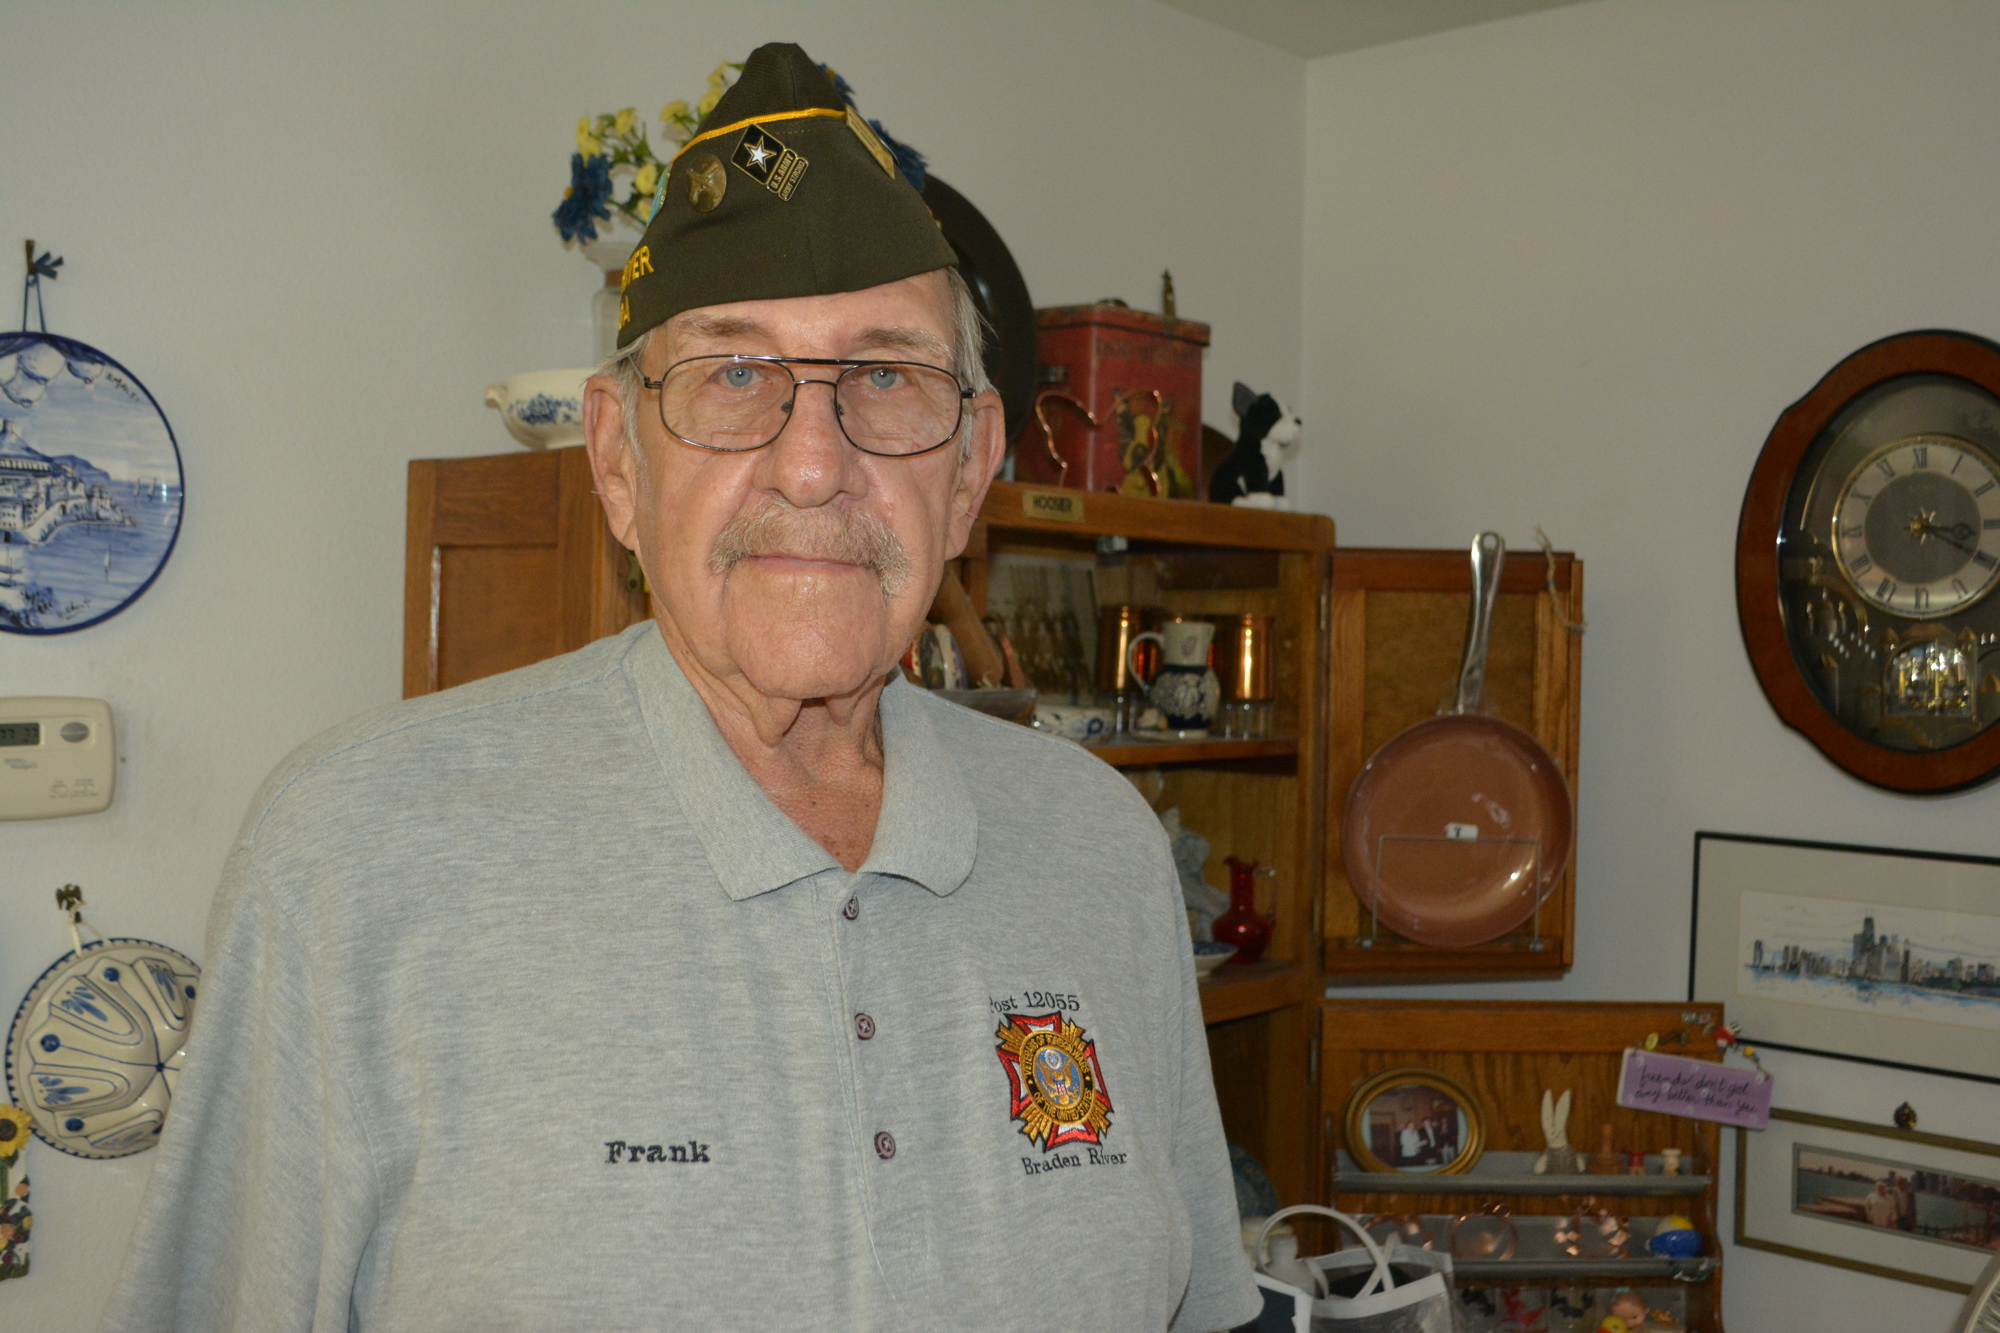 Frank Royer, who served in the Army during the Korean War era, will serve as a grand marshal of the Tribute to Heroes Parade in Lakewood Ranch.